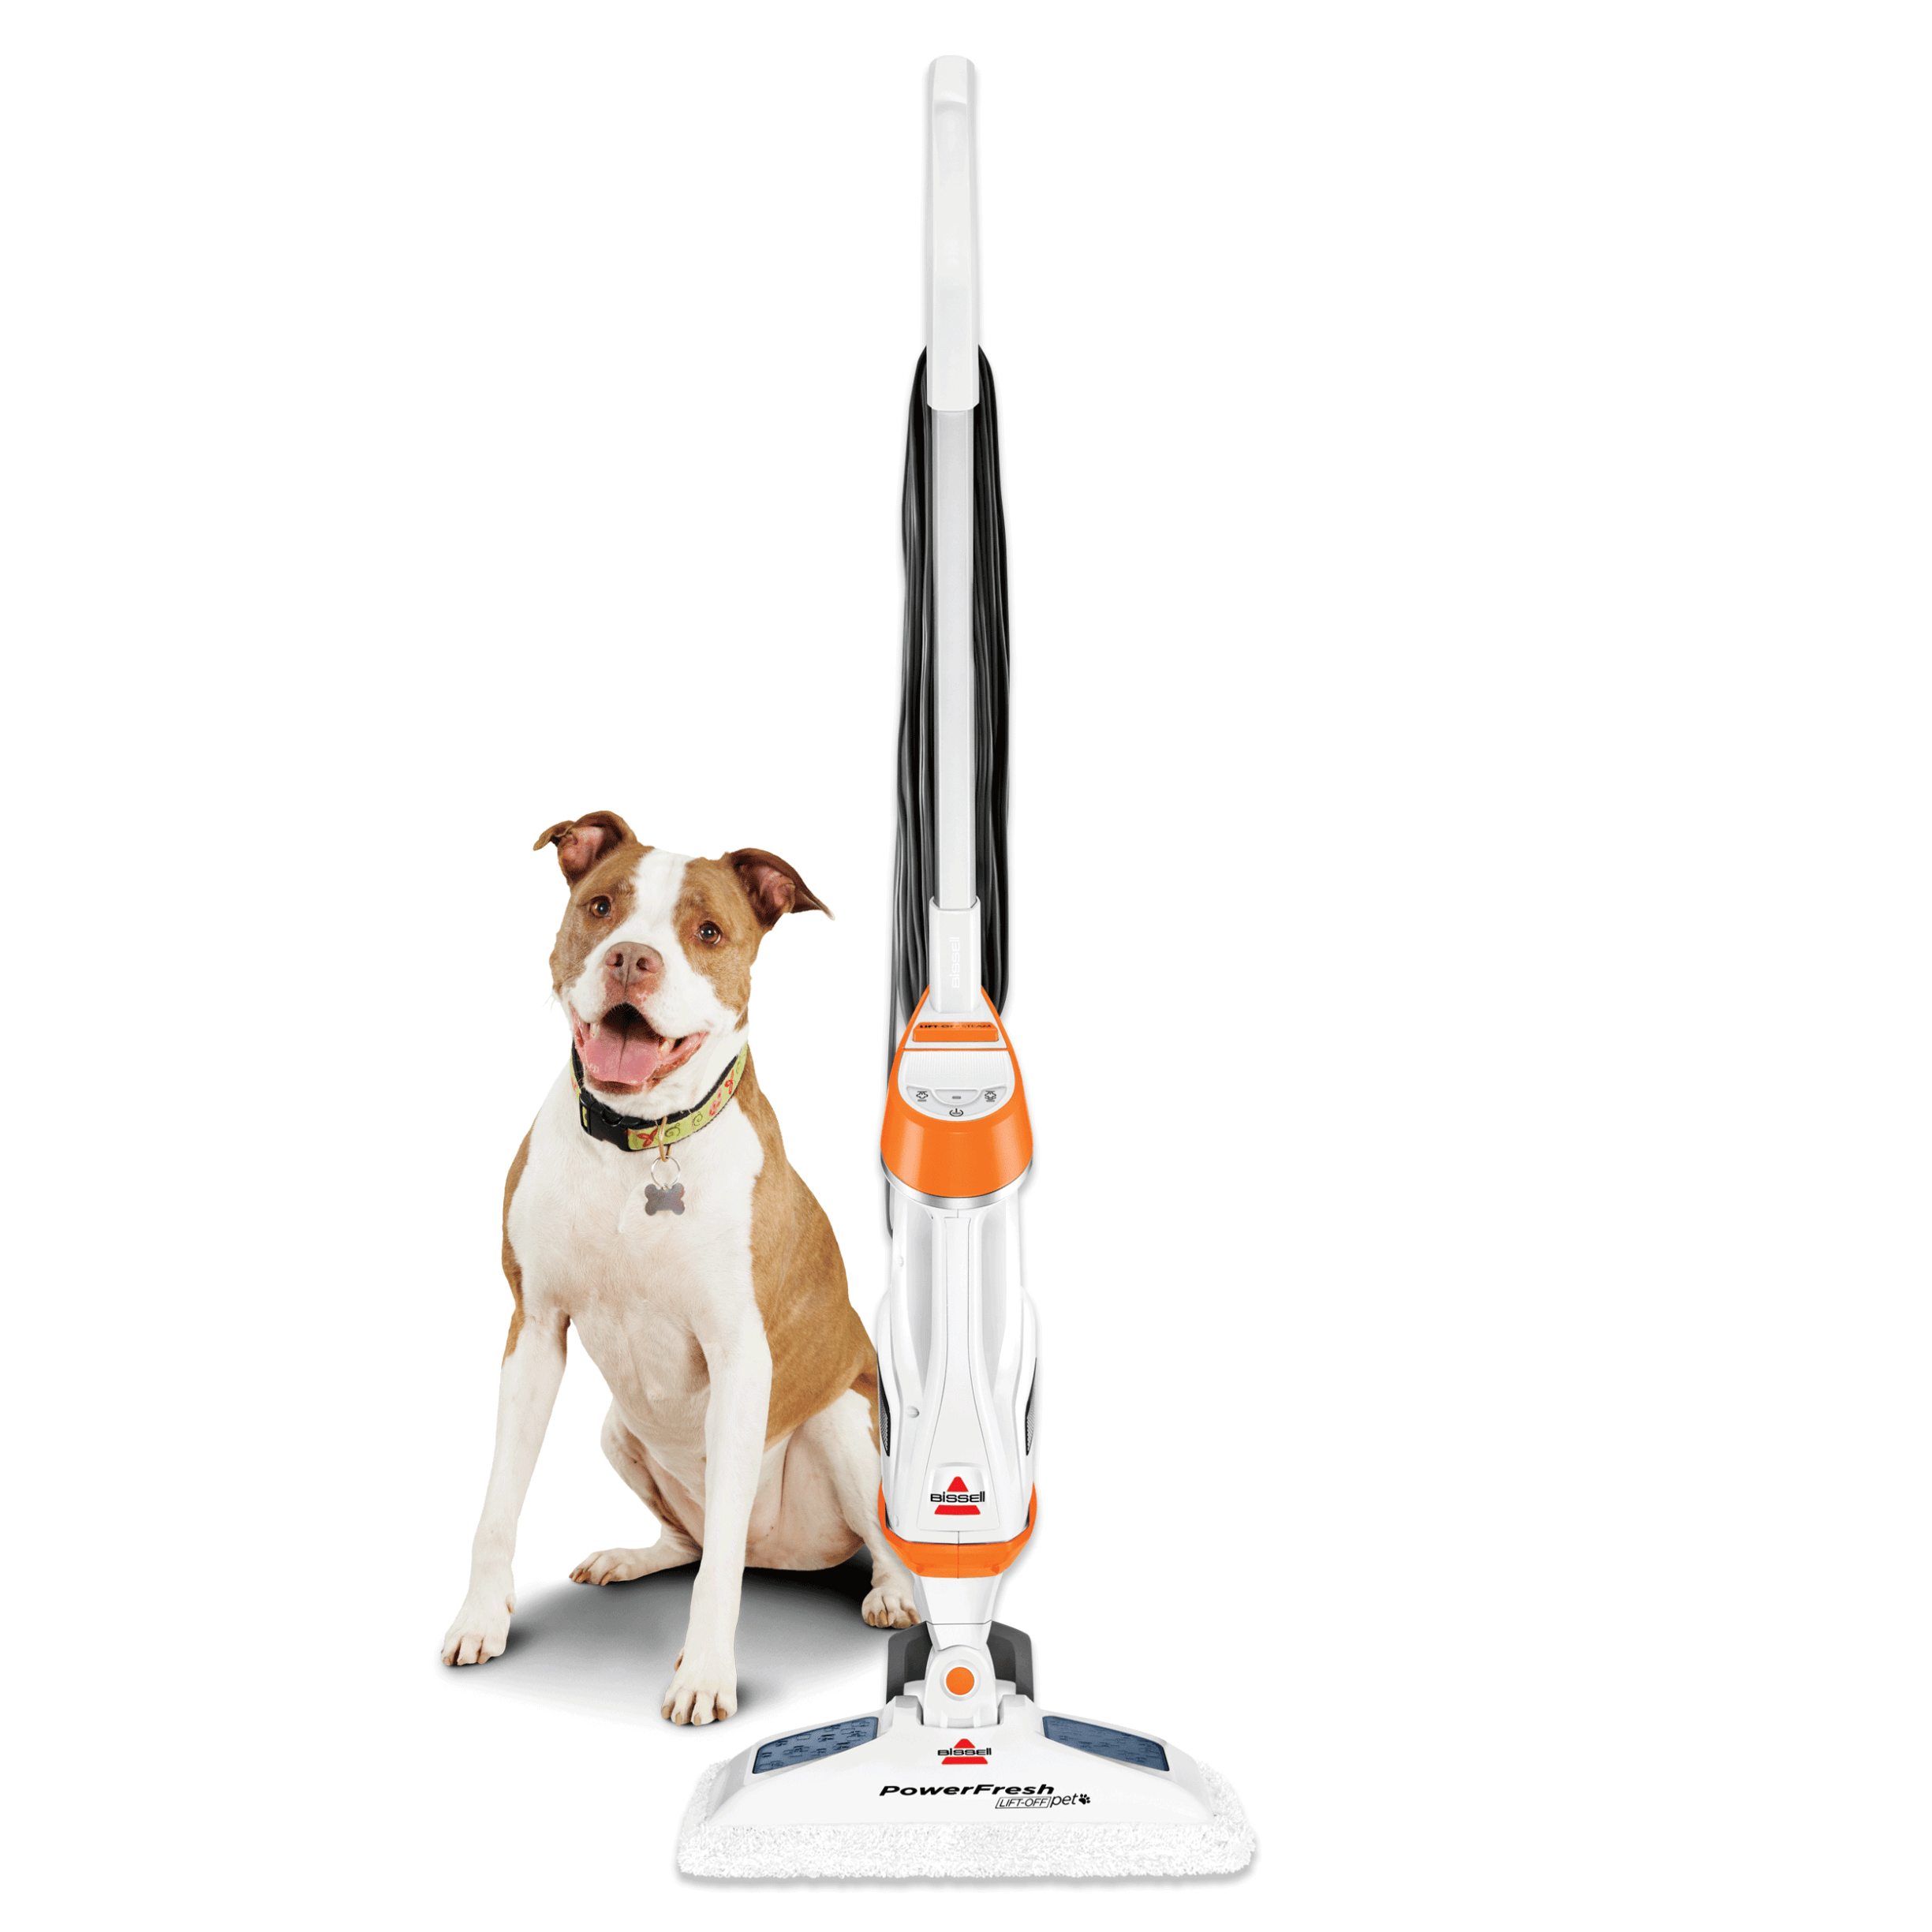 https://www.bissell.com/on/demandware.static/-/Sites-master-catalog-bissell/default/dwd8d84554/hi-res/Product%20Images/15441/15441_Powerfresh_Pet_Lift-Off_Roxie.png